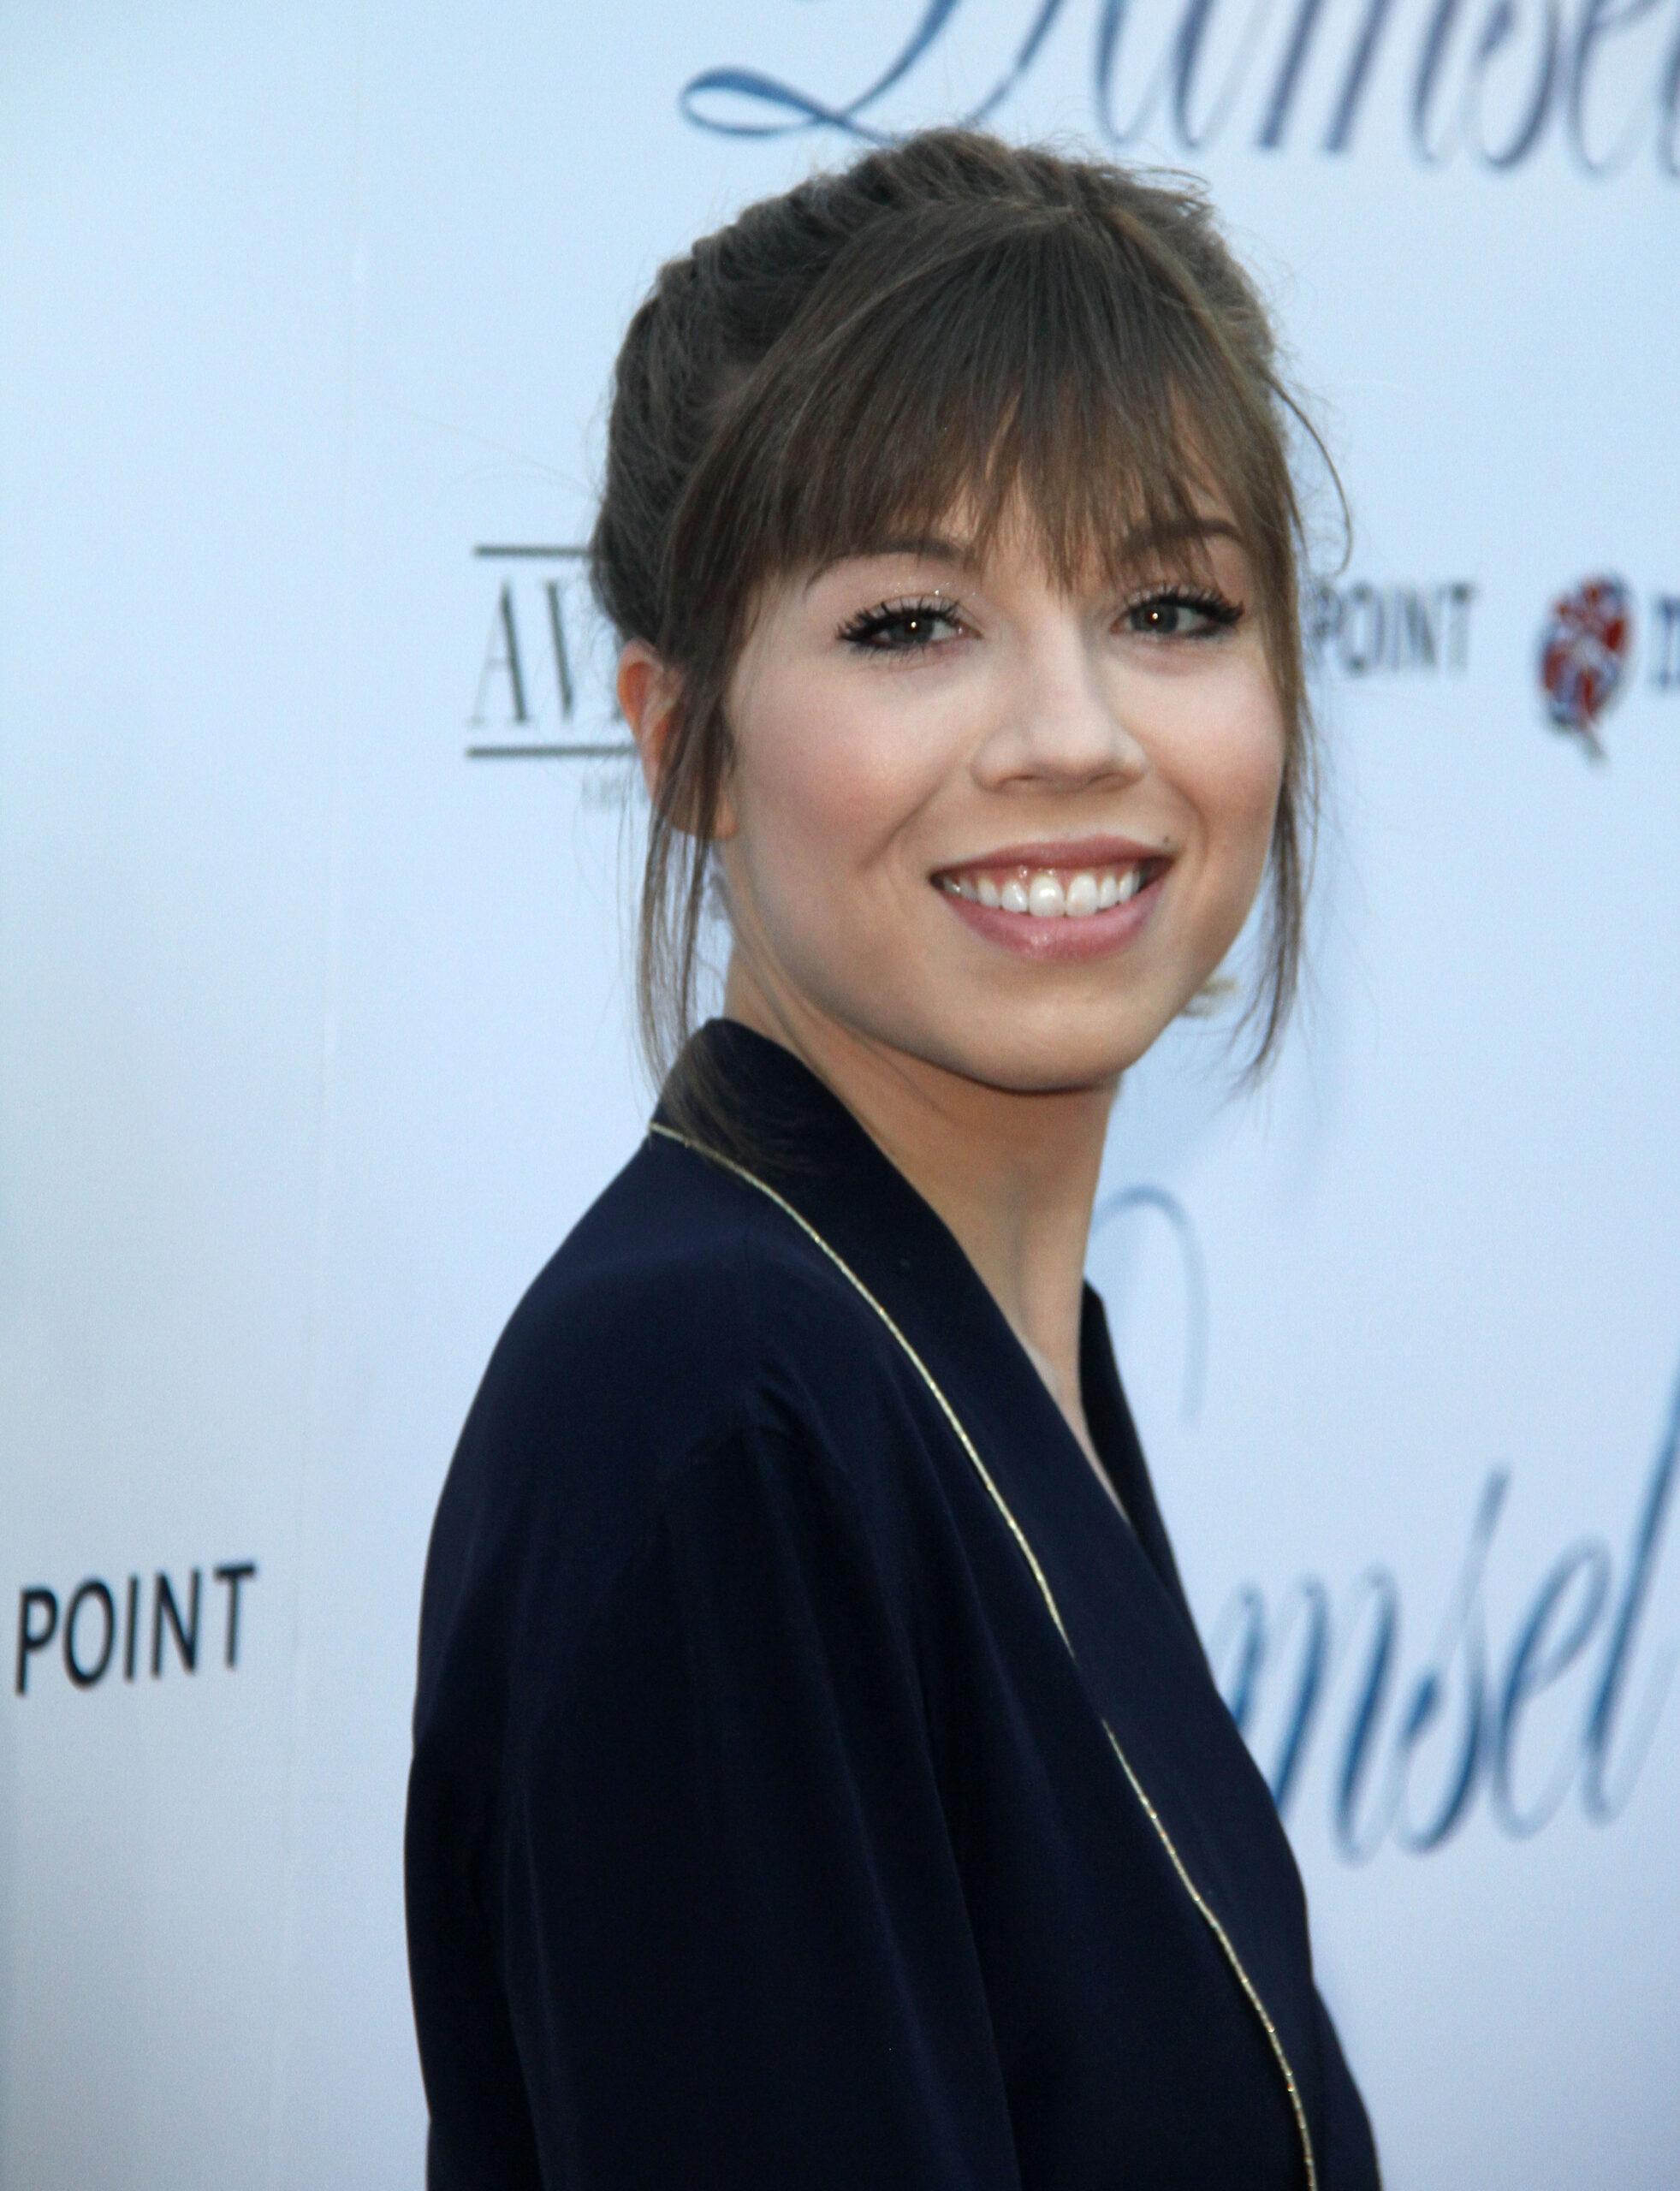 DAMSEL Premiere at The Arclight Cinemas in Hollywood, California on 6/13/18. 13 Jun 2018 Pictured: Jennette McCurdy. 